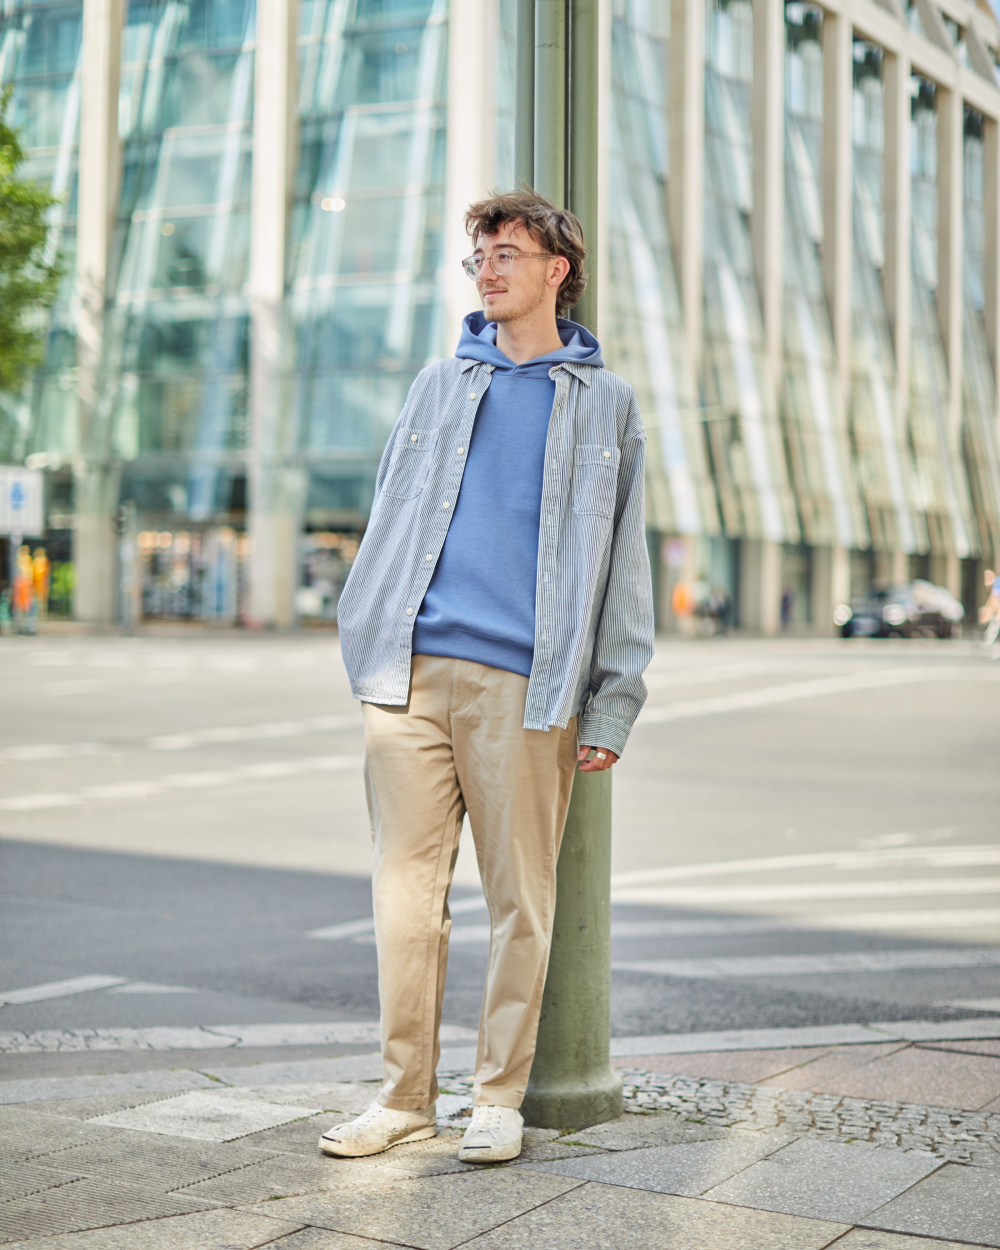 Check styling ideas for「HICKORY WORK SHIRT、COTTON RELAXED ANKLE